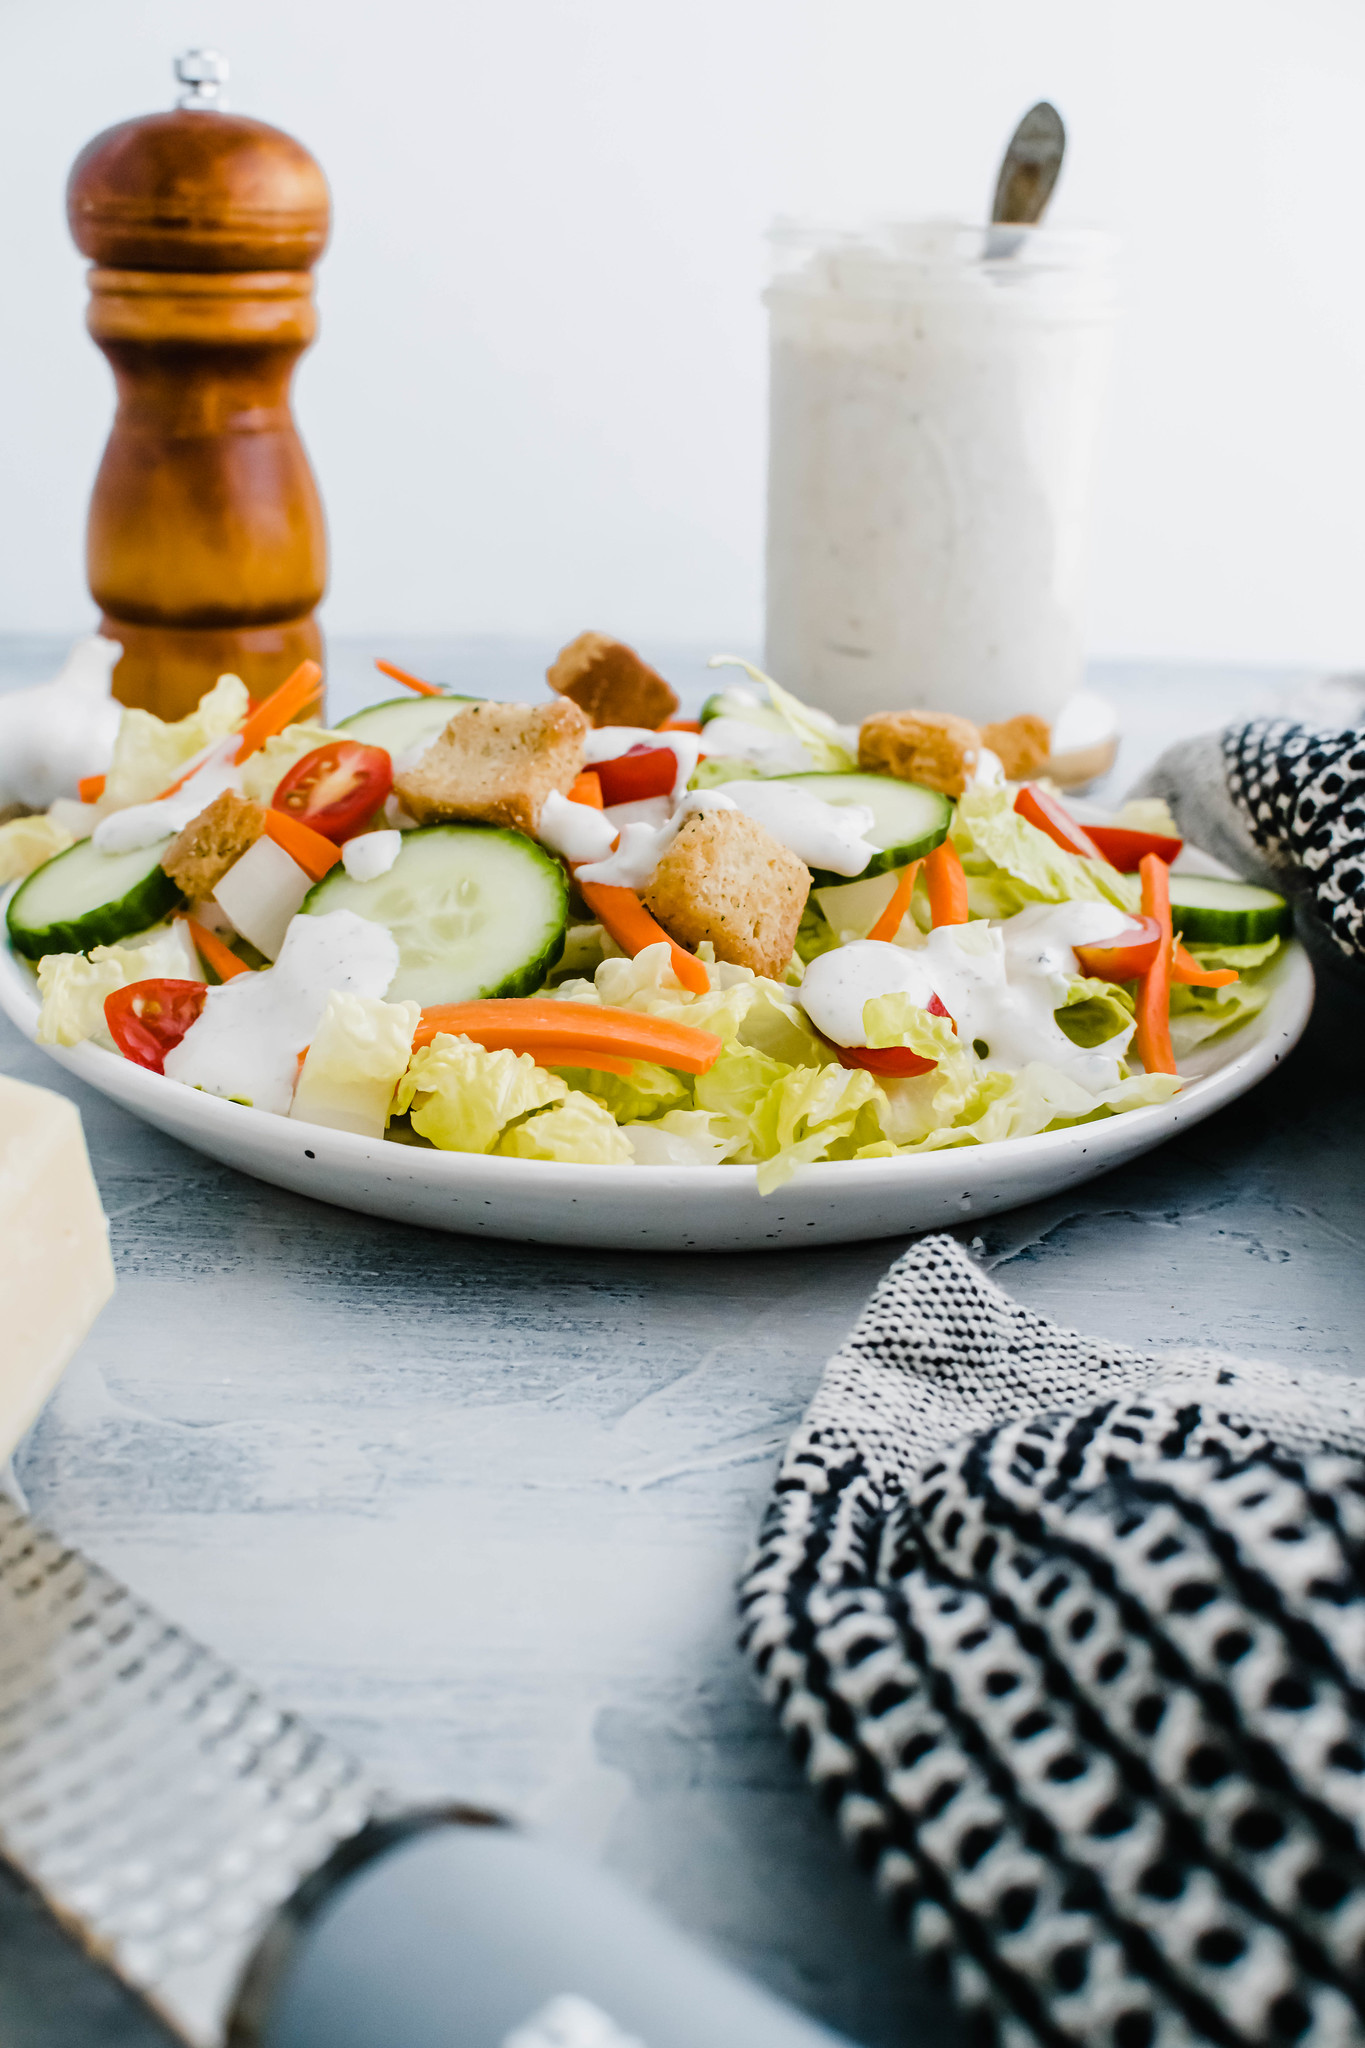 Salad of romaine, cucumbers, carrots, halved cherry tomatoes and croutons drizzled with parmesan peppercorn dressing.